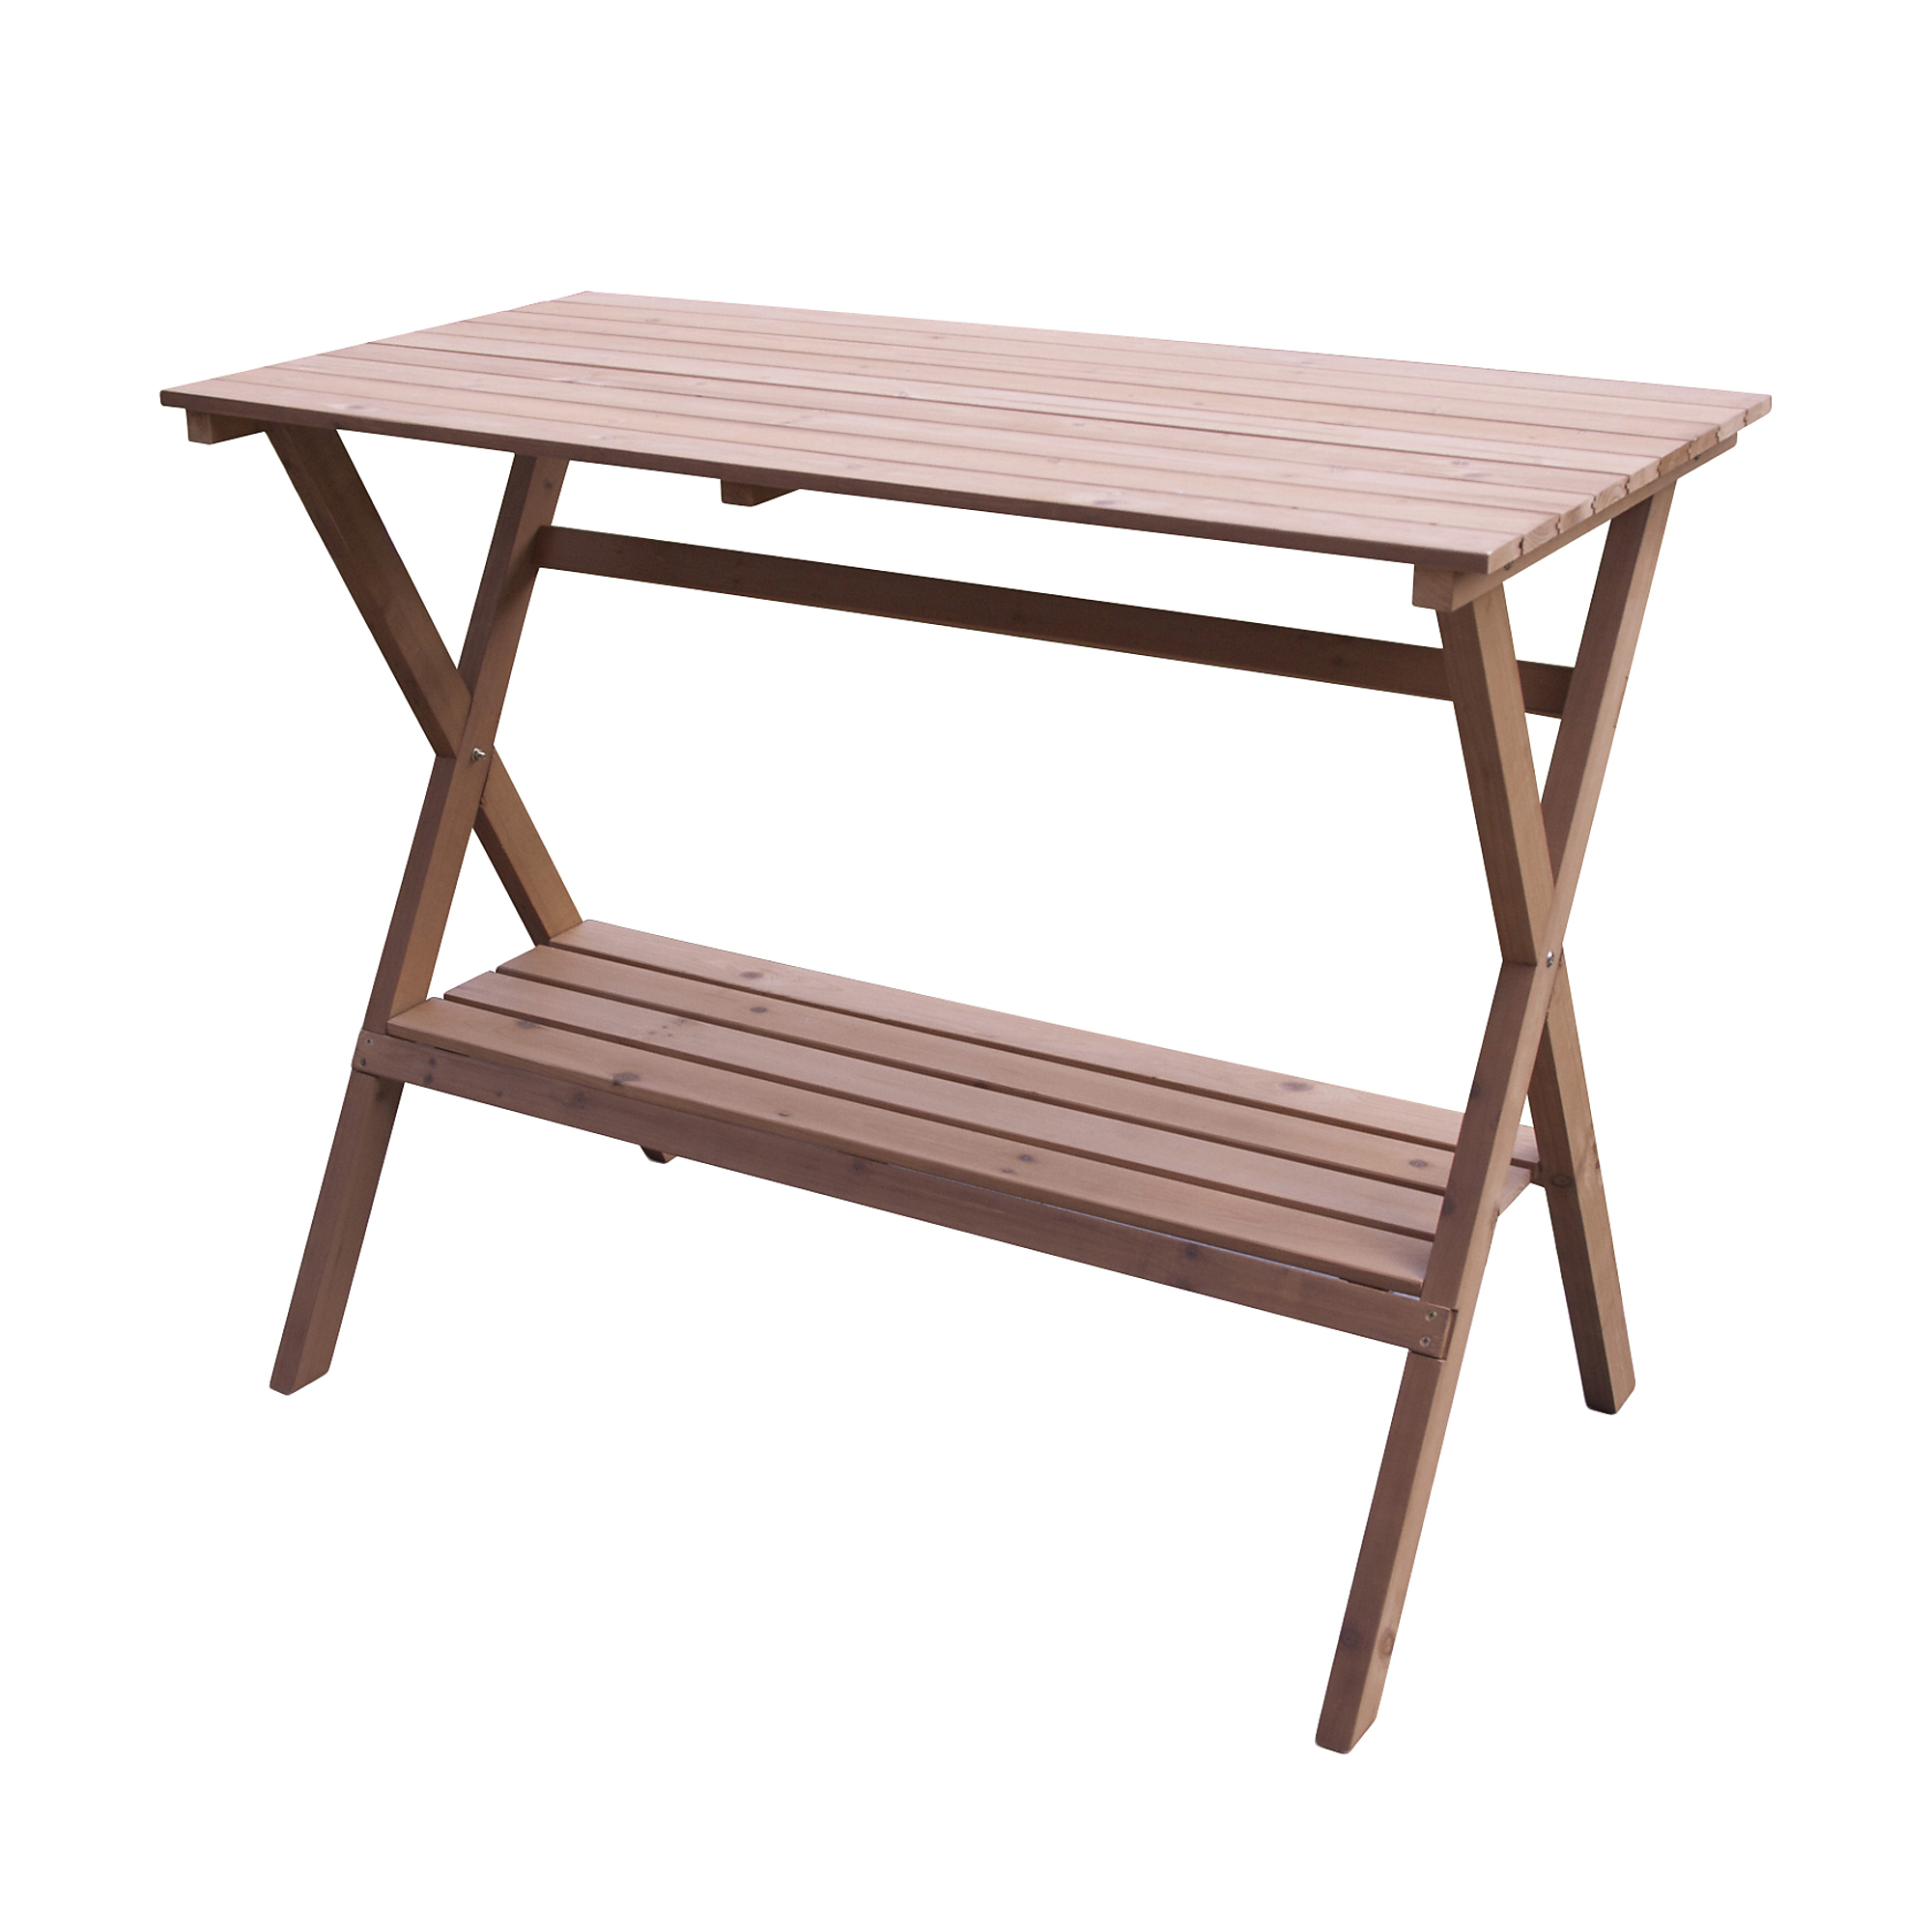 Merry Products, Simple Potting Bench, Container Length 25.39 in, Container Width 46.97 in, Material Wood, Model MPG-PB05